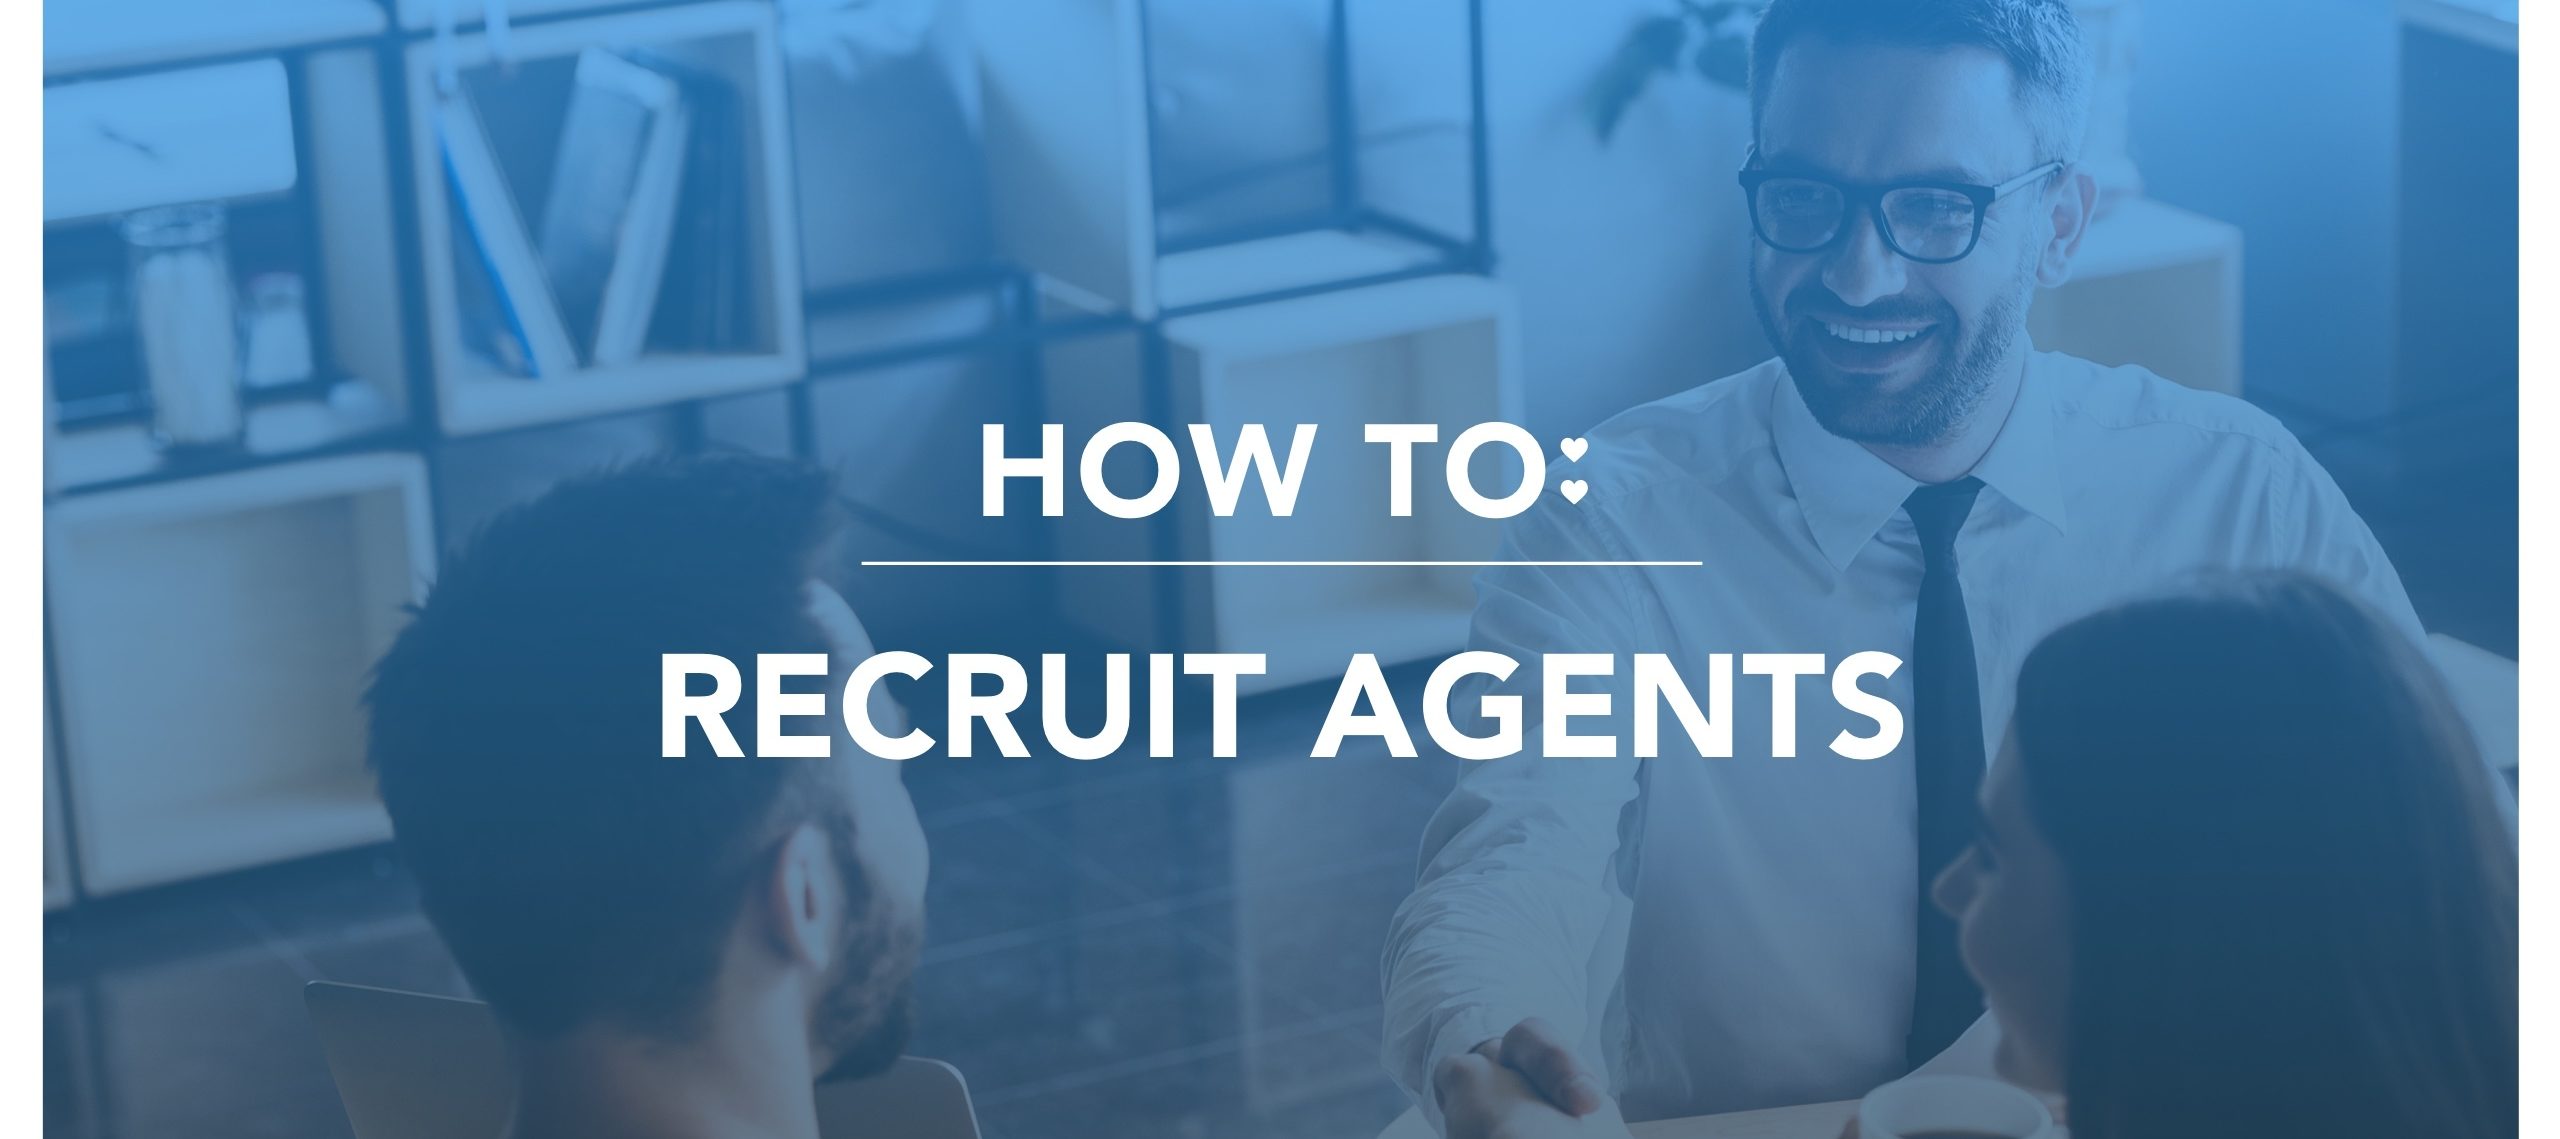 How to Recruit Agents Header